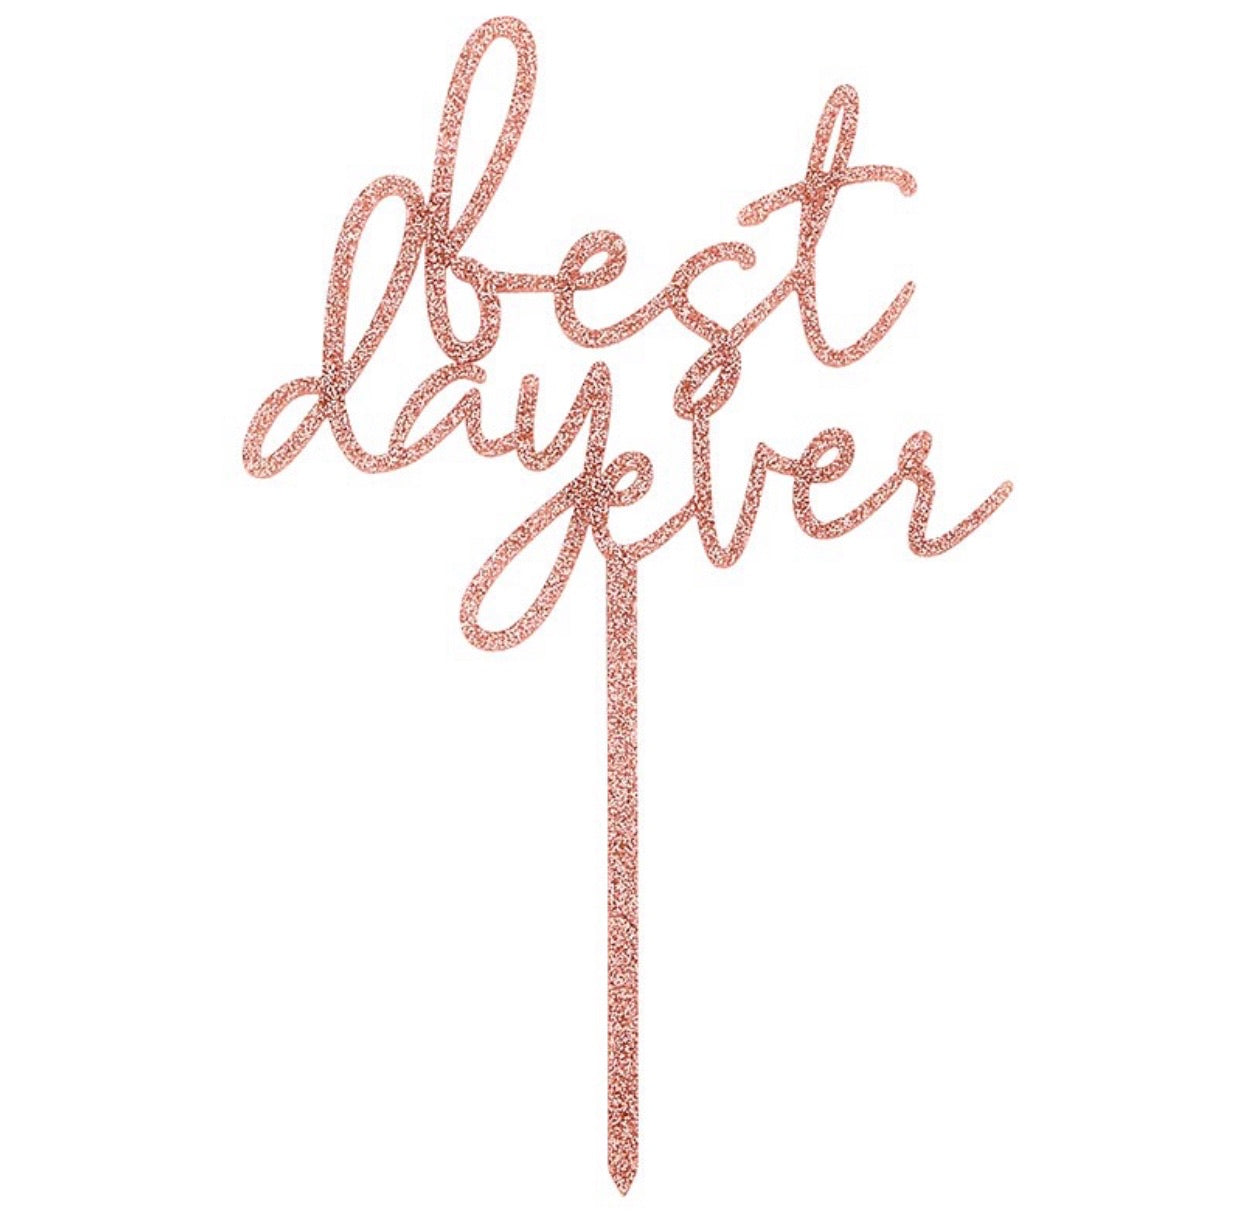 Best Day Ever - Acrylic Cake Topper